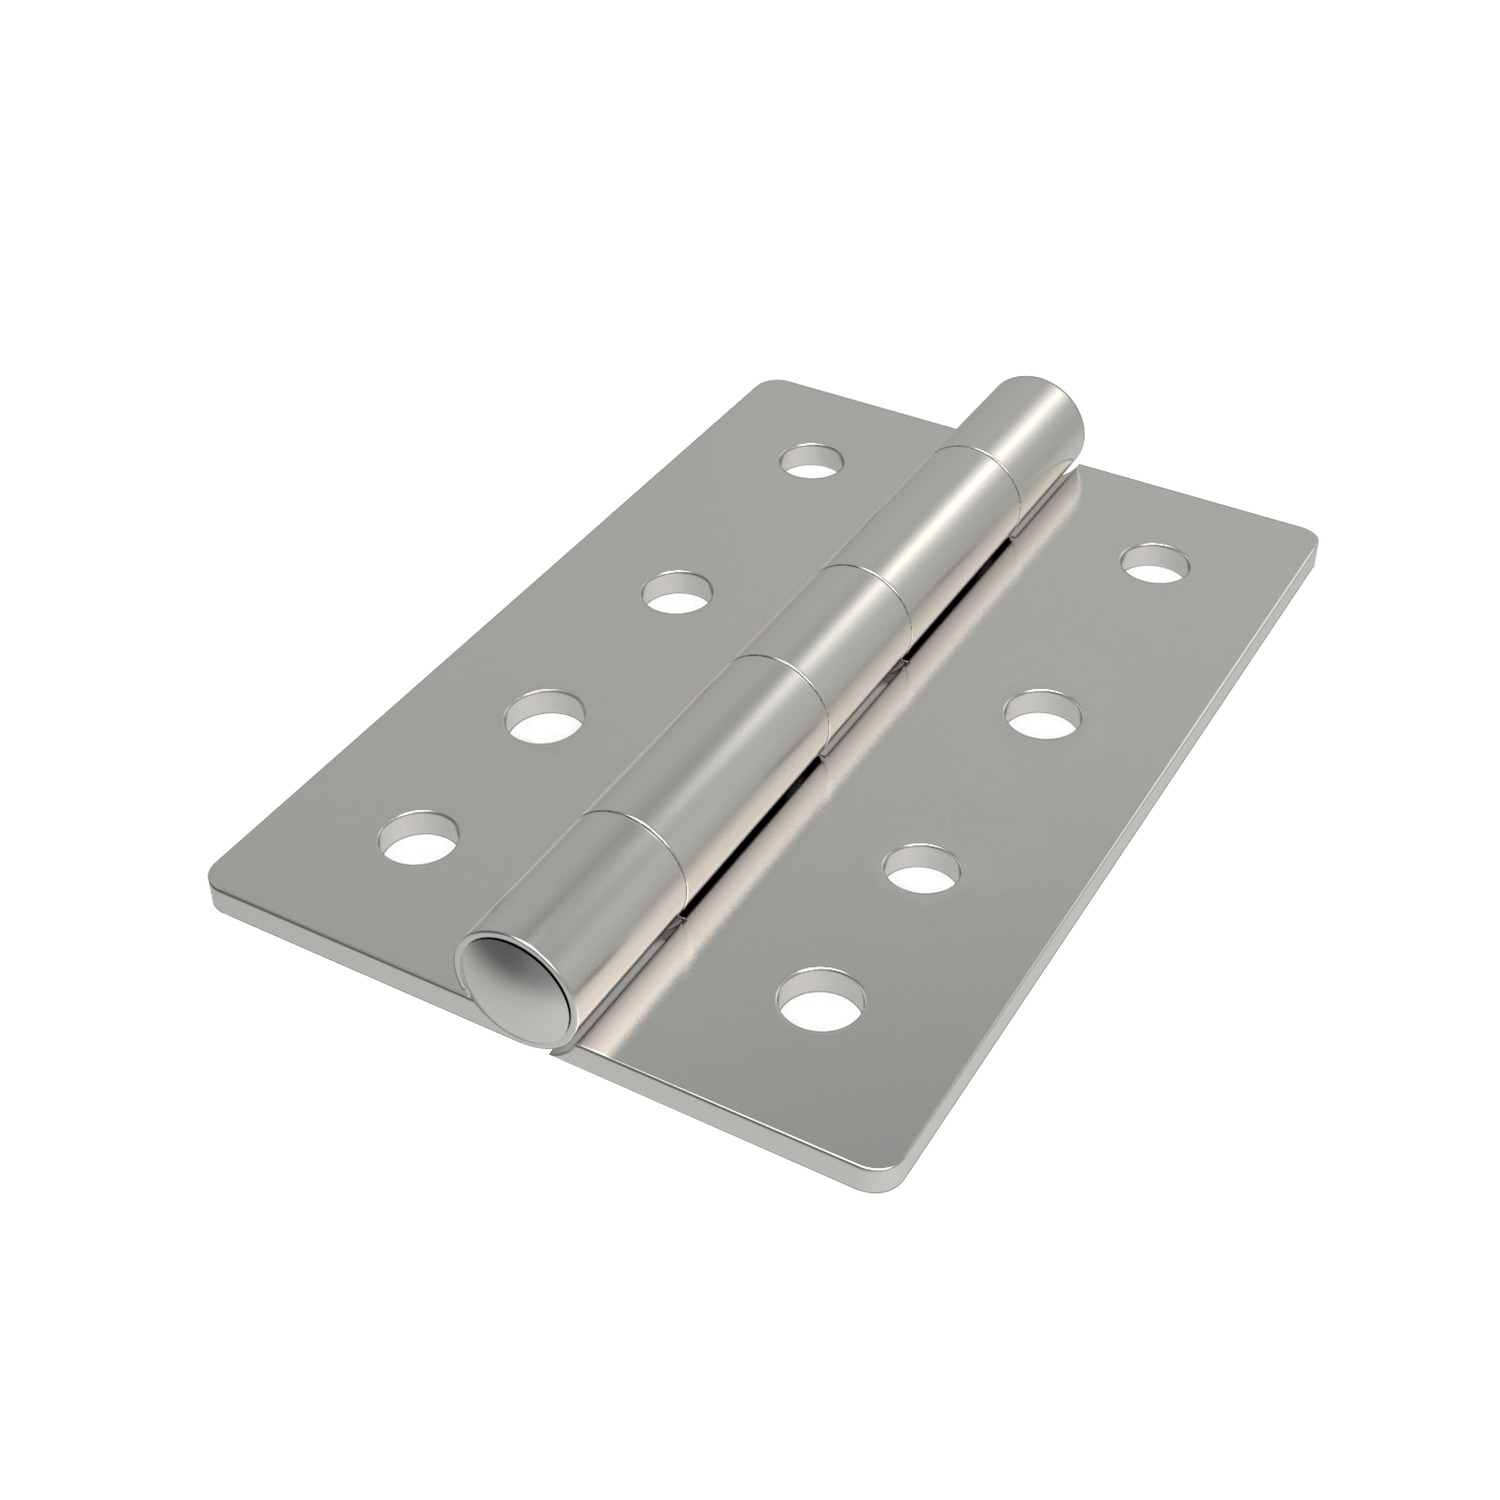 S0780.AC0040 Surface Mount - Leaf Hinges Screw mount - Stainless steel. 40 x 35. Also known as 52380.W0040